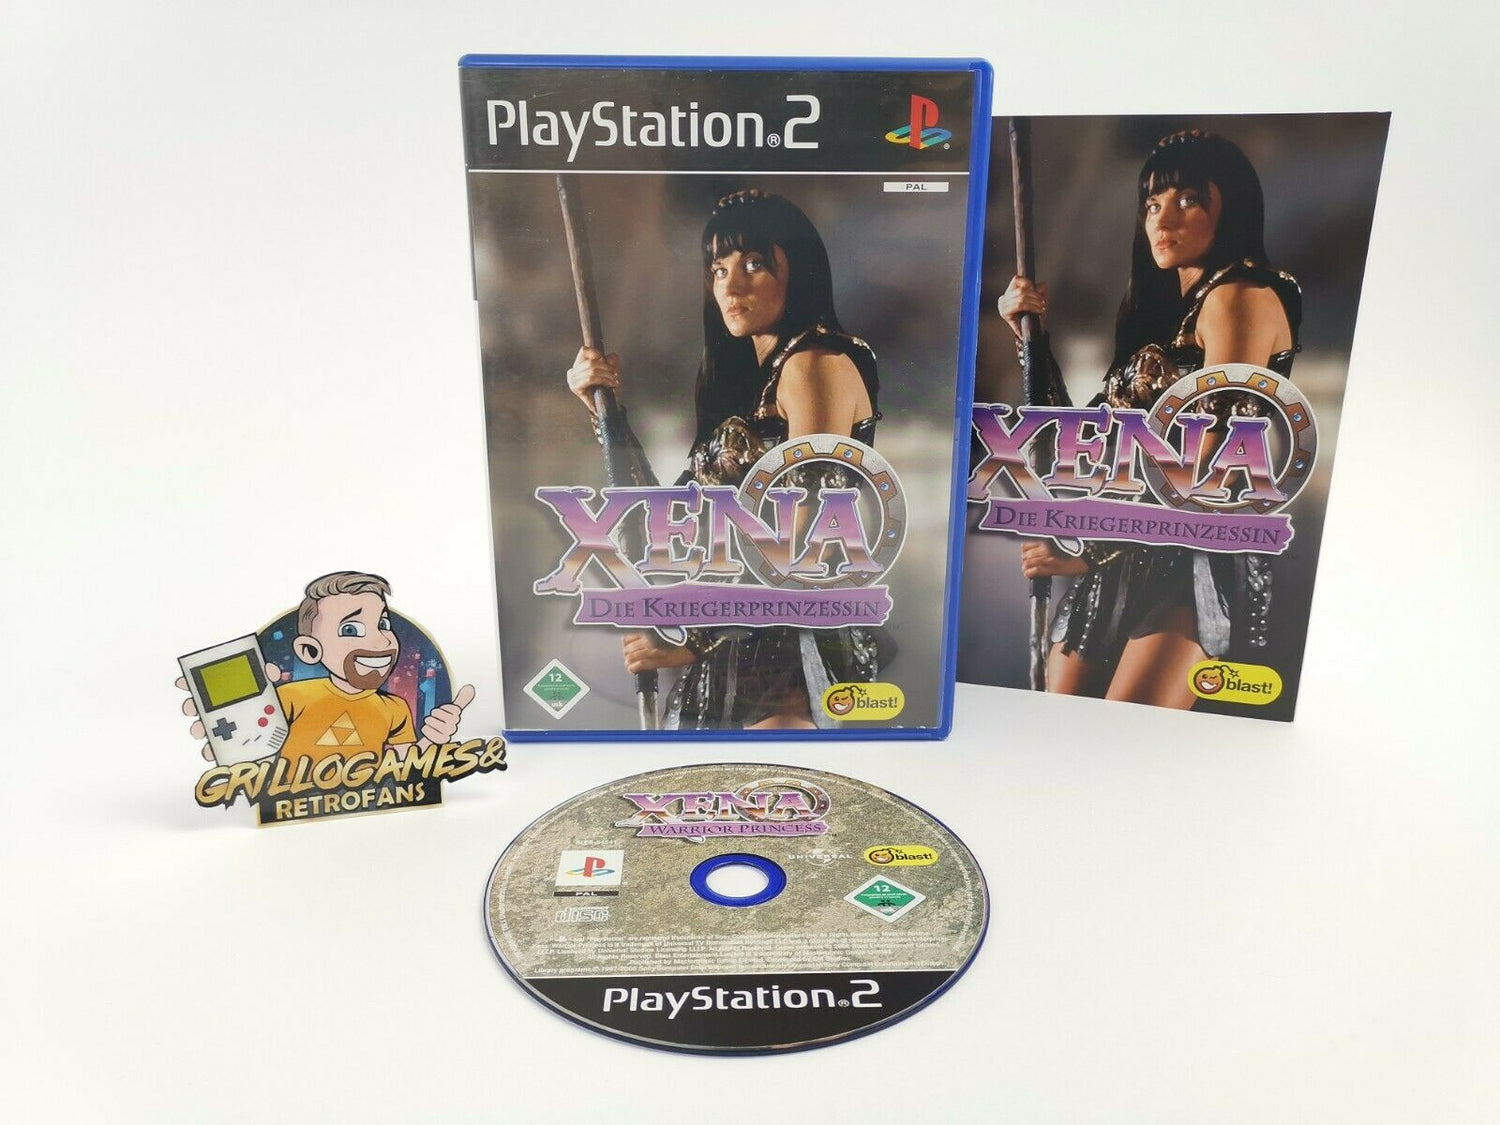 Sony Playstation 2 Game 